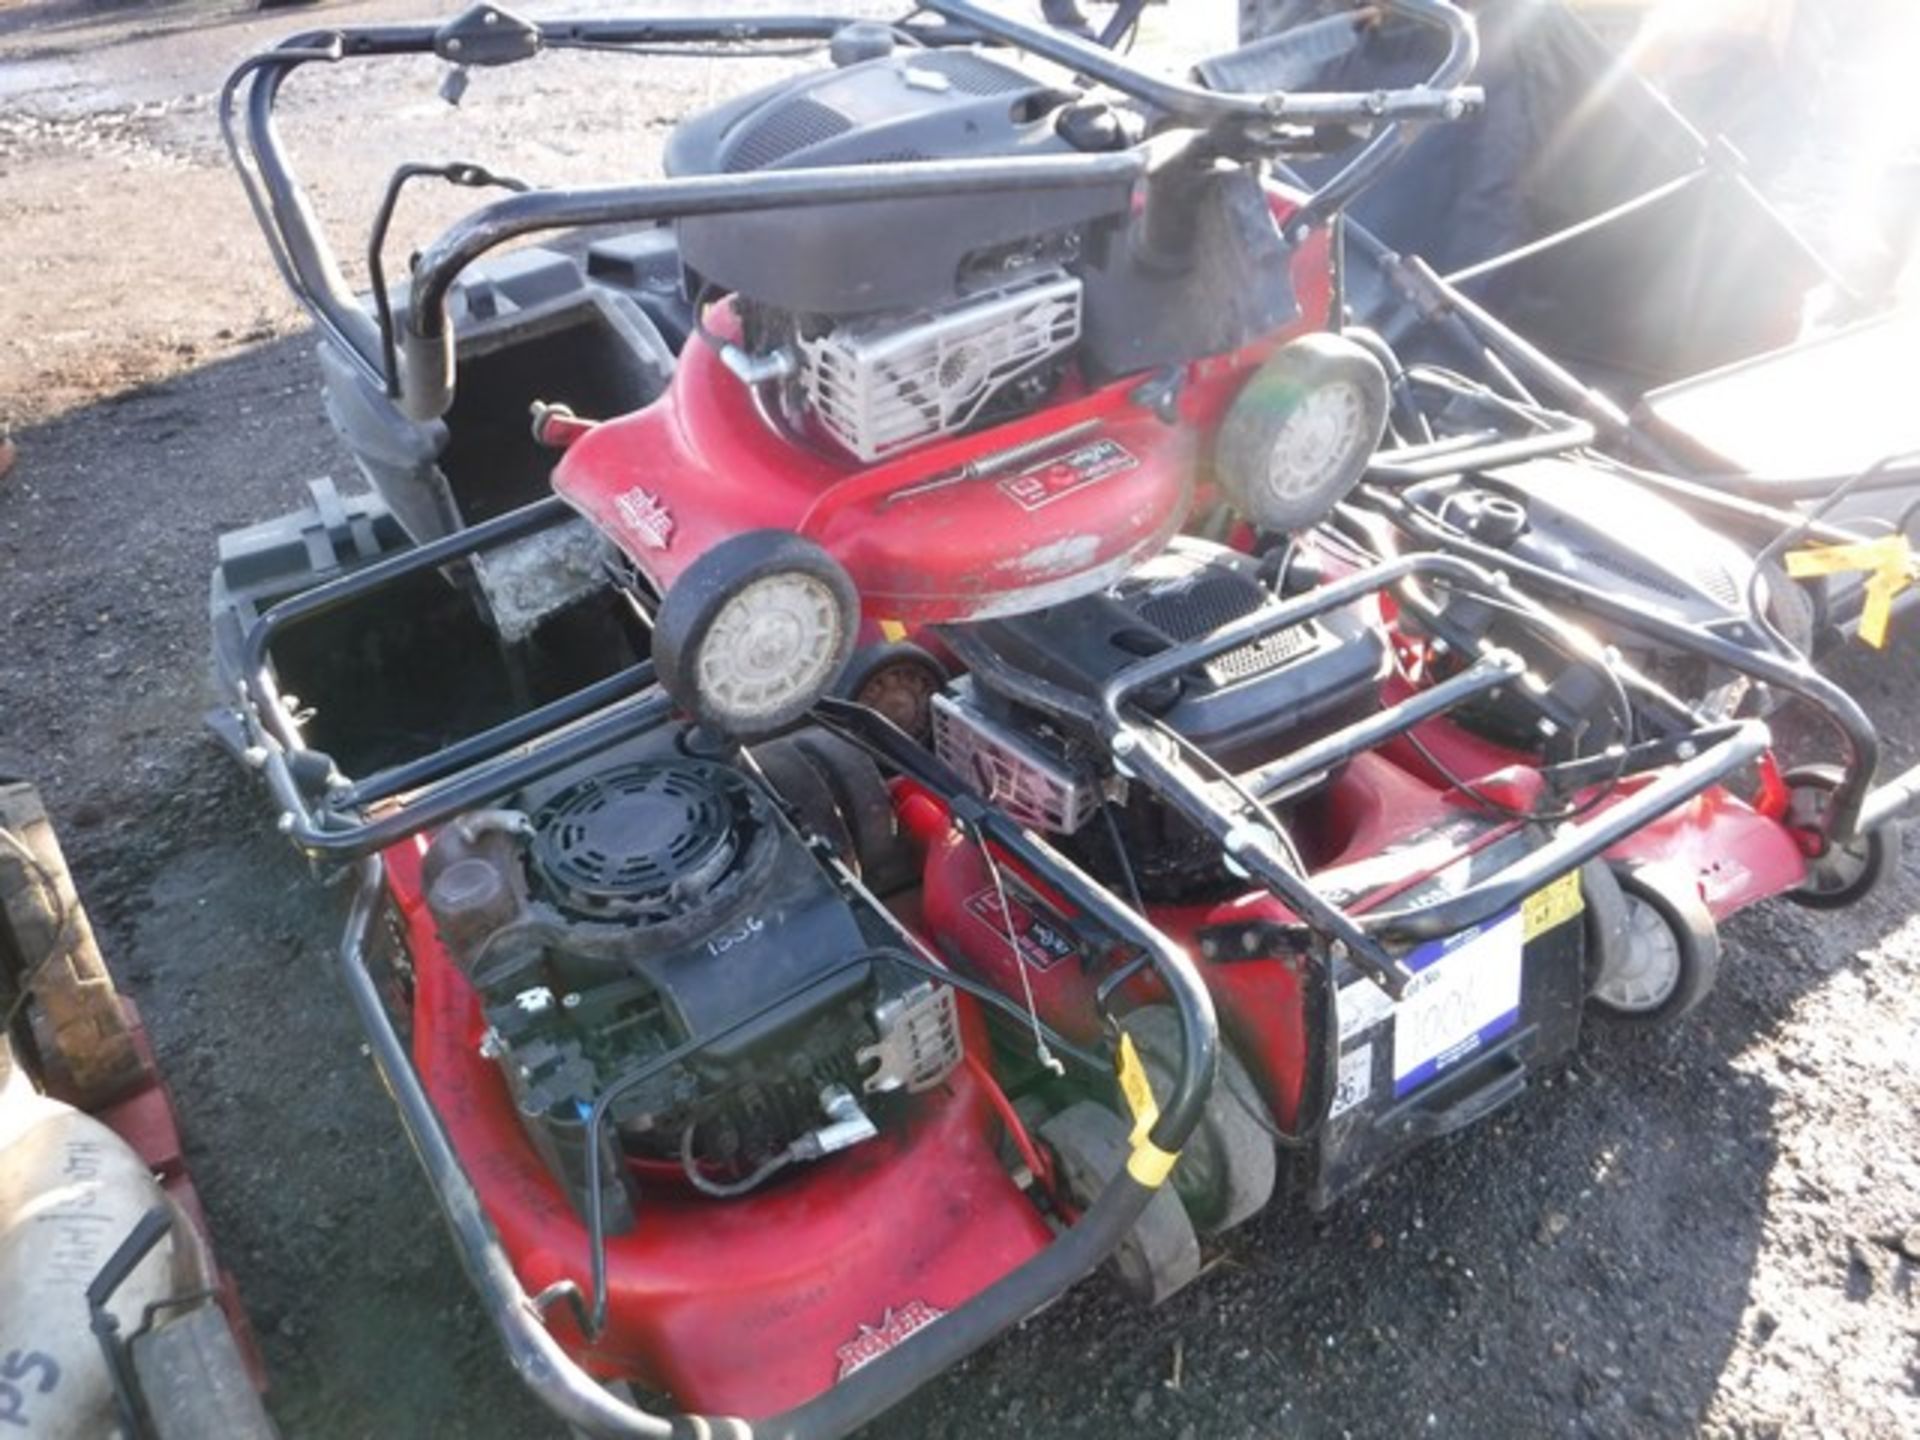 ROVER REGAL LAWN MOWERS BRIGGS AND STRATTON ENGINE C/W GRASS BOX x5 - Image 2 of 3